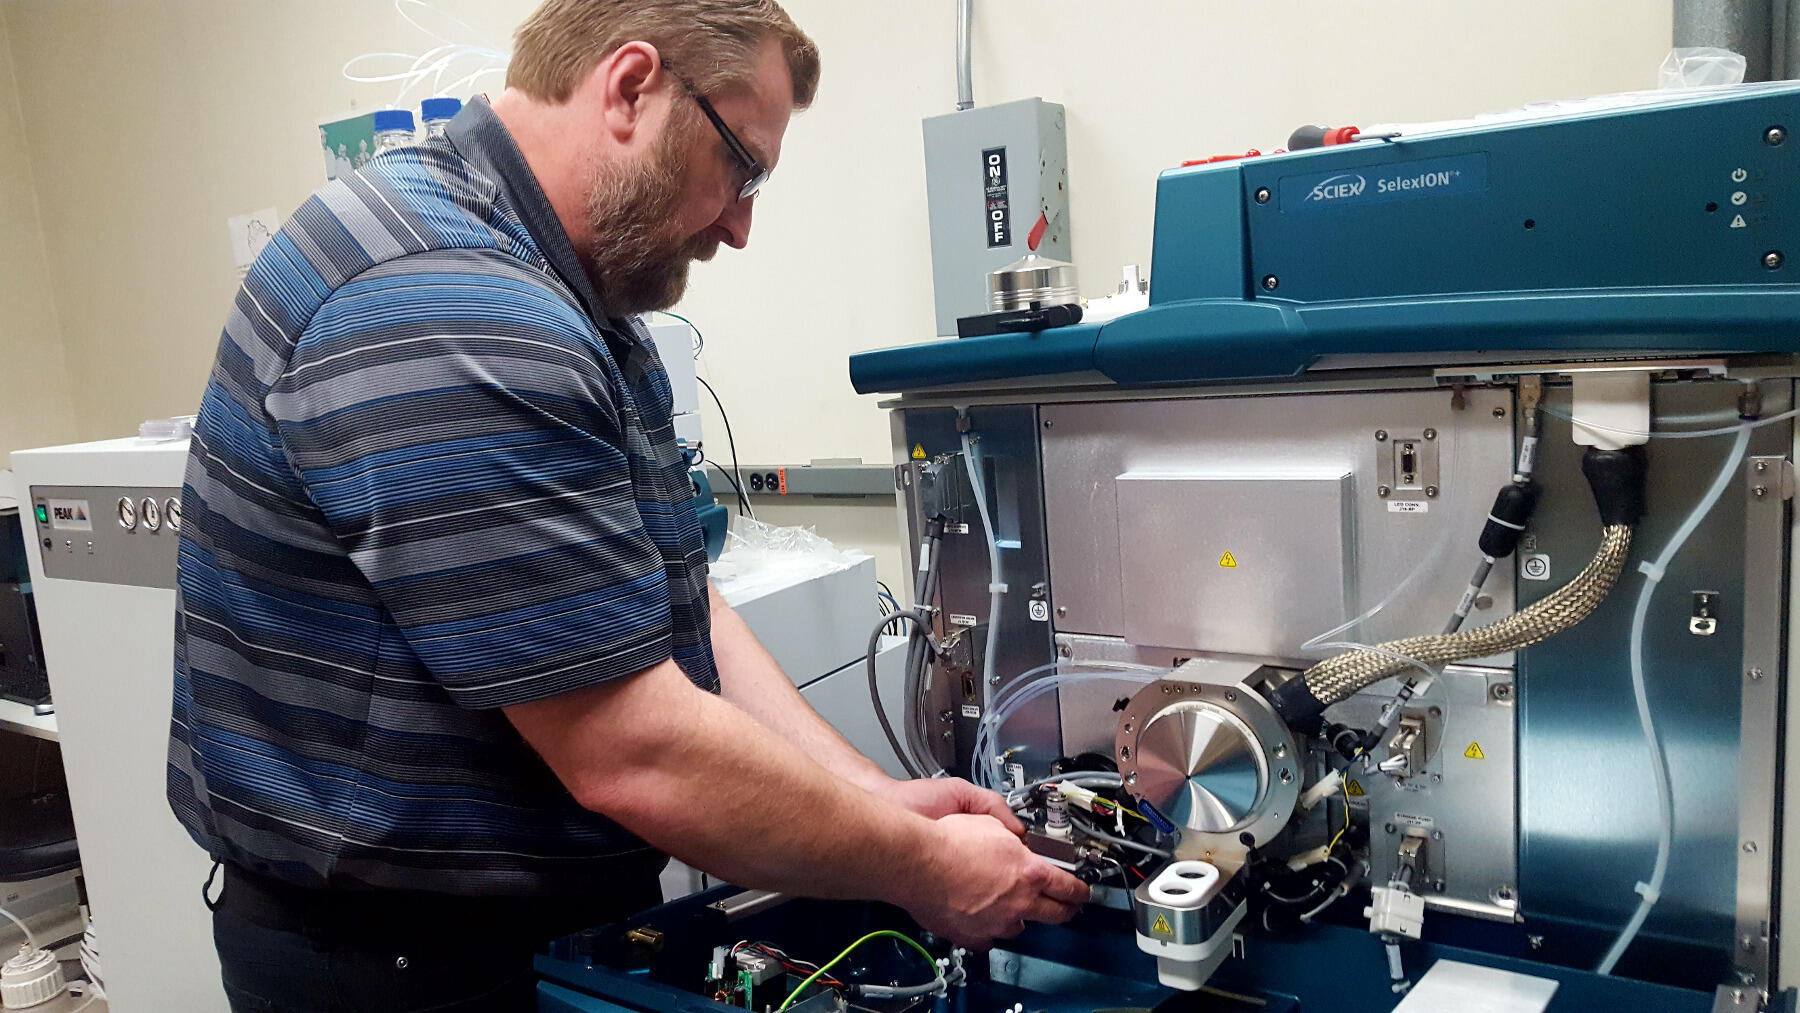 Bill Atkins, a SCIEX engineer, services a mass spectrometer in the School of Pharmacy.
<br>Photo by Leah Small, University Public Affairs.
